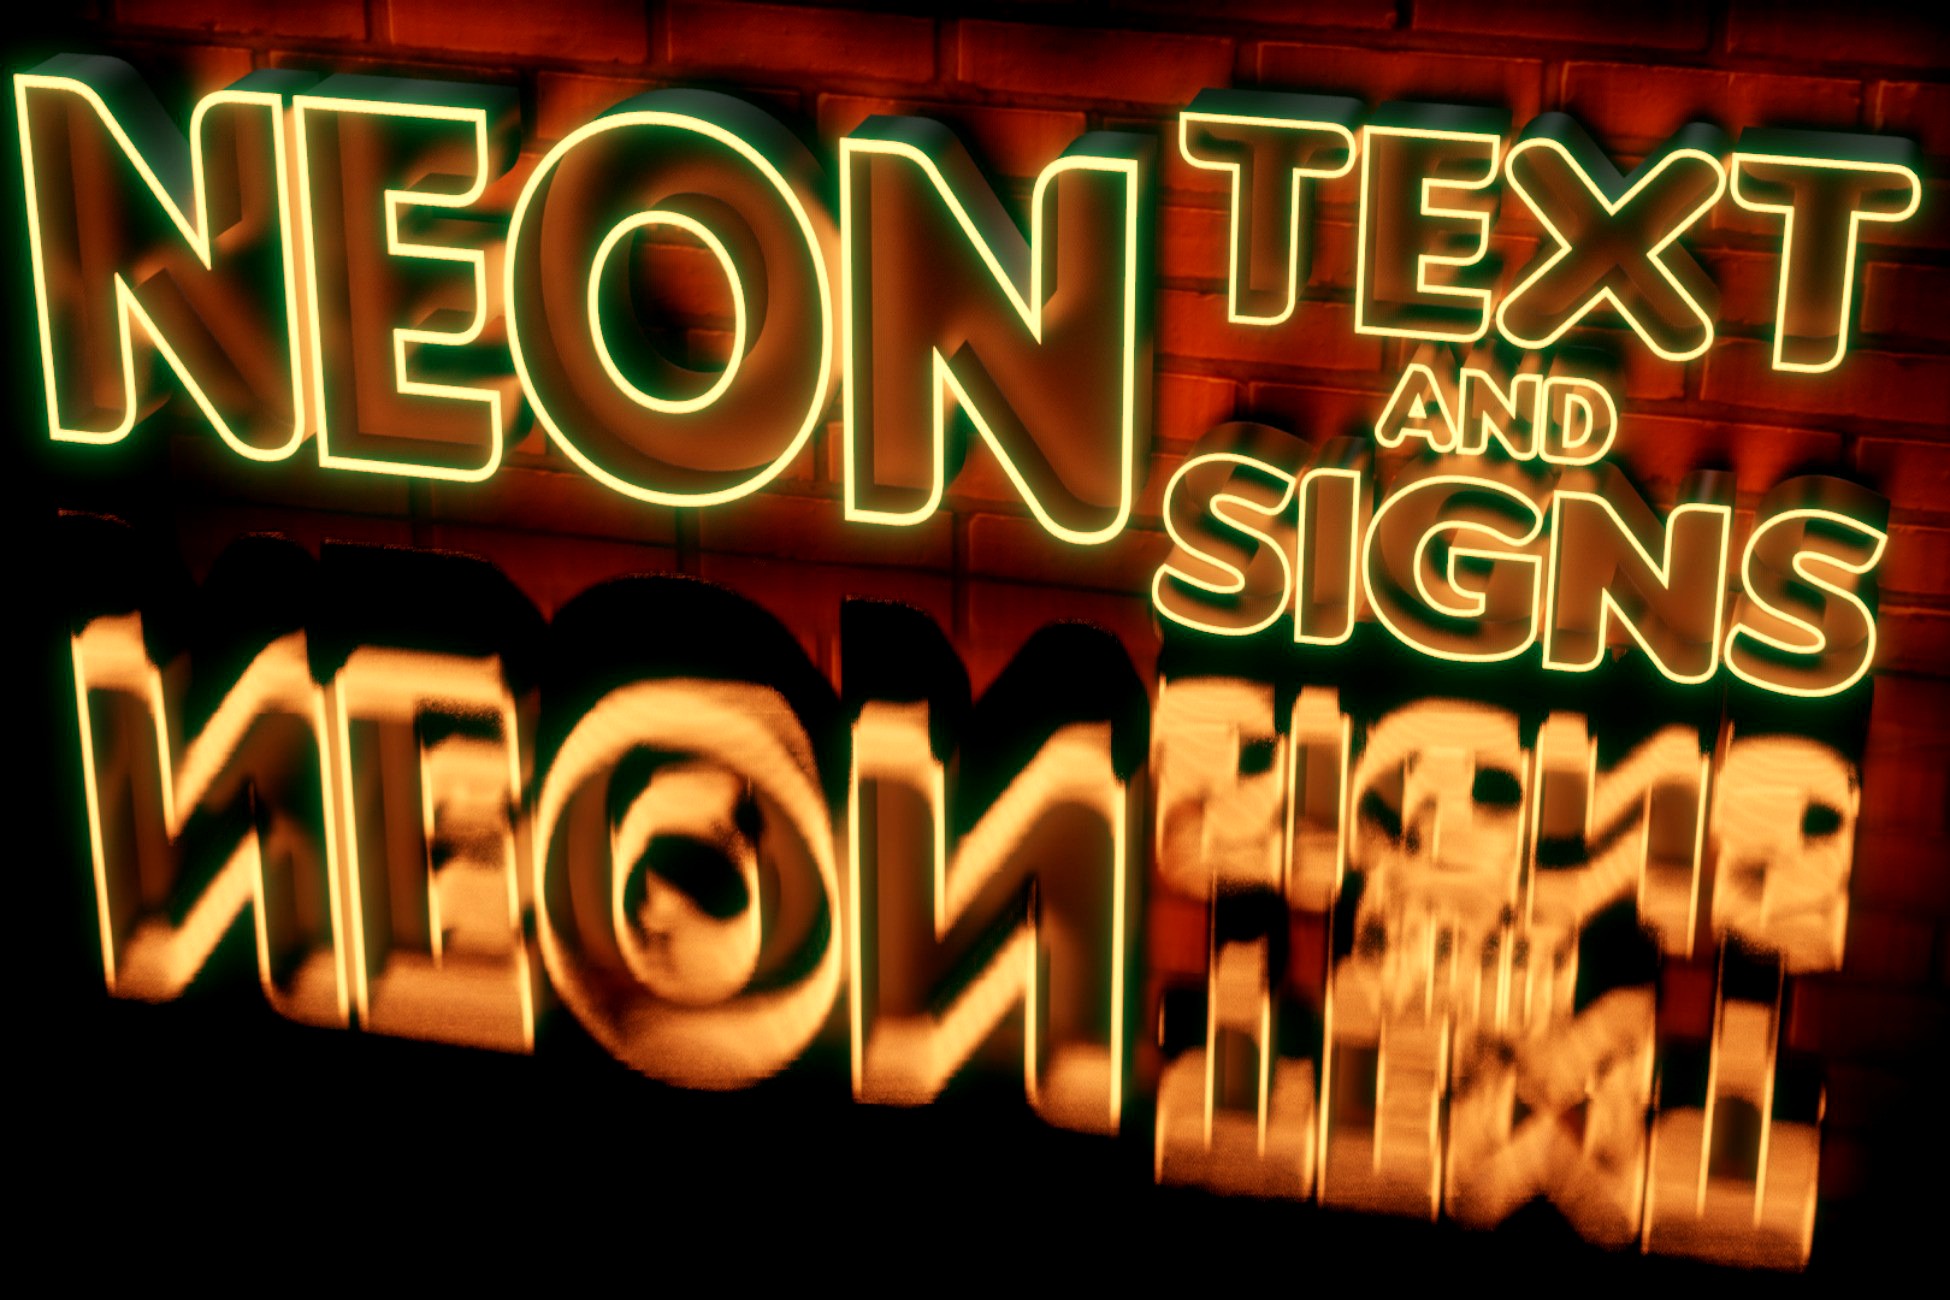 Neon Text and Signs